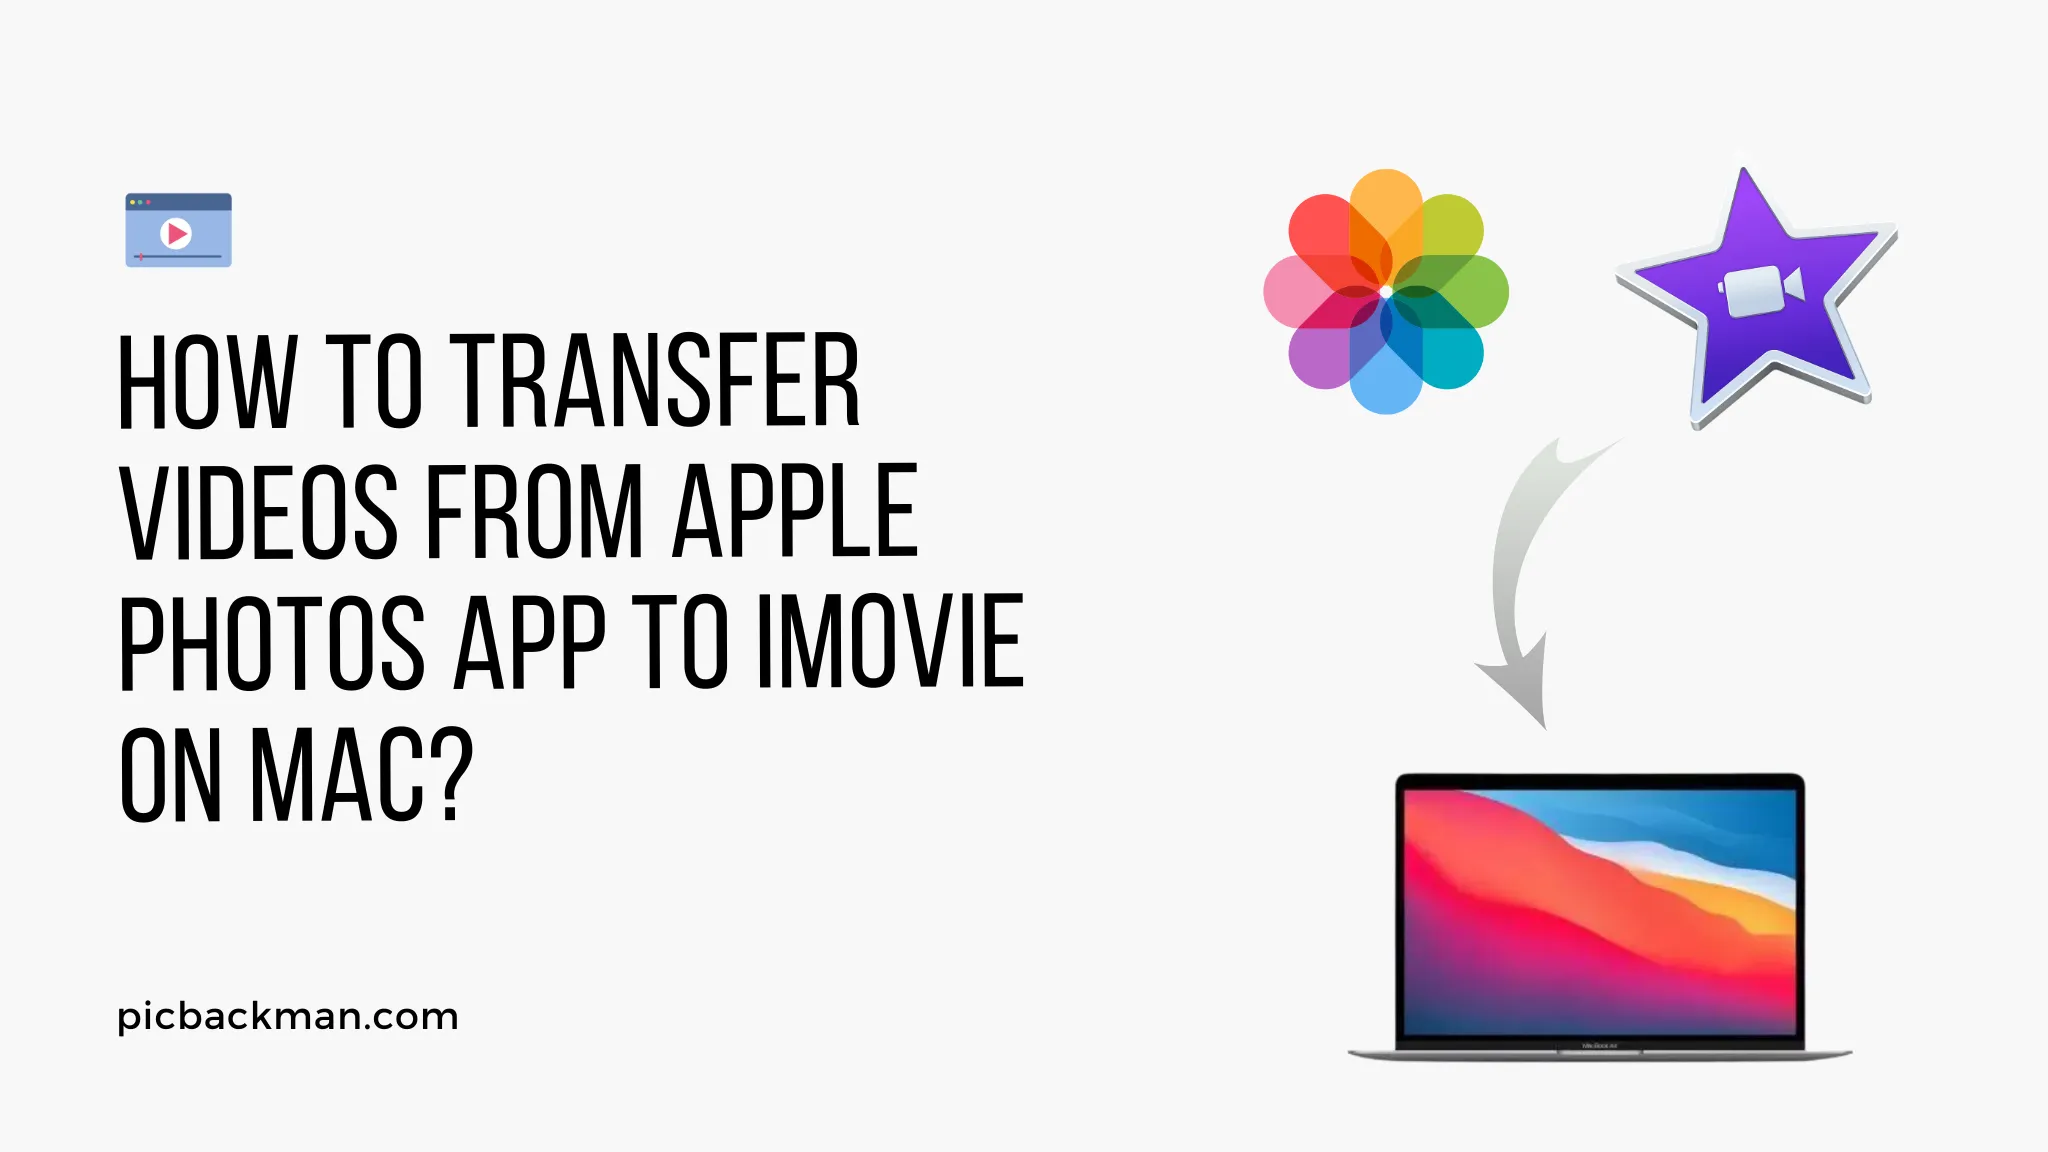 How to Transfer Videos from Apple Photos App to iMovie on Mac